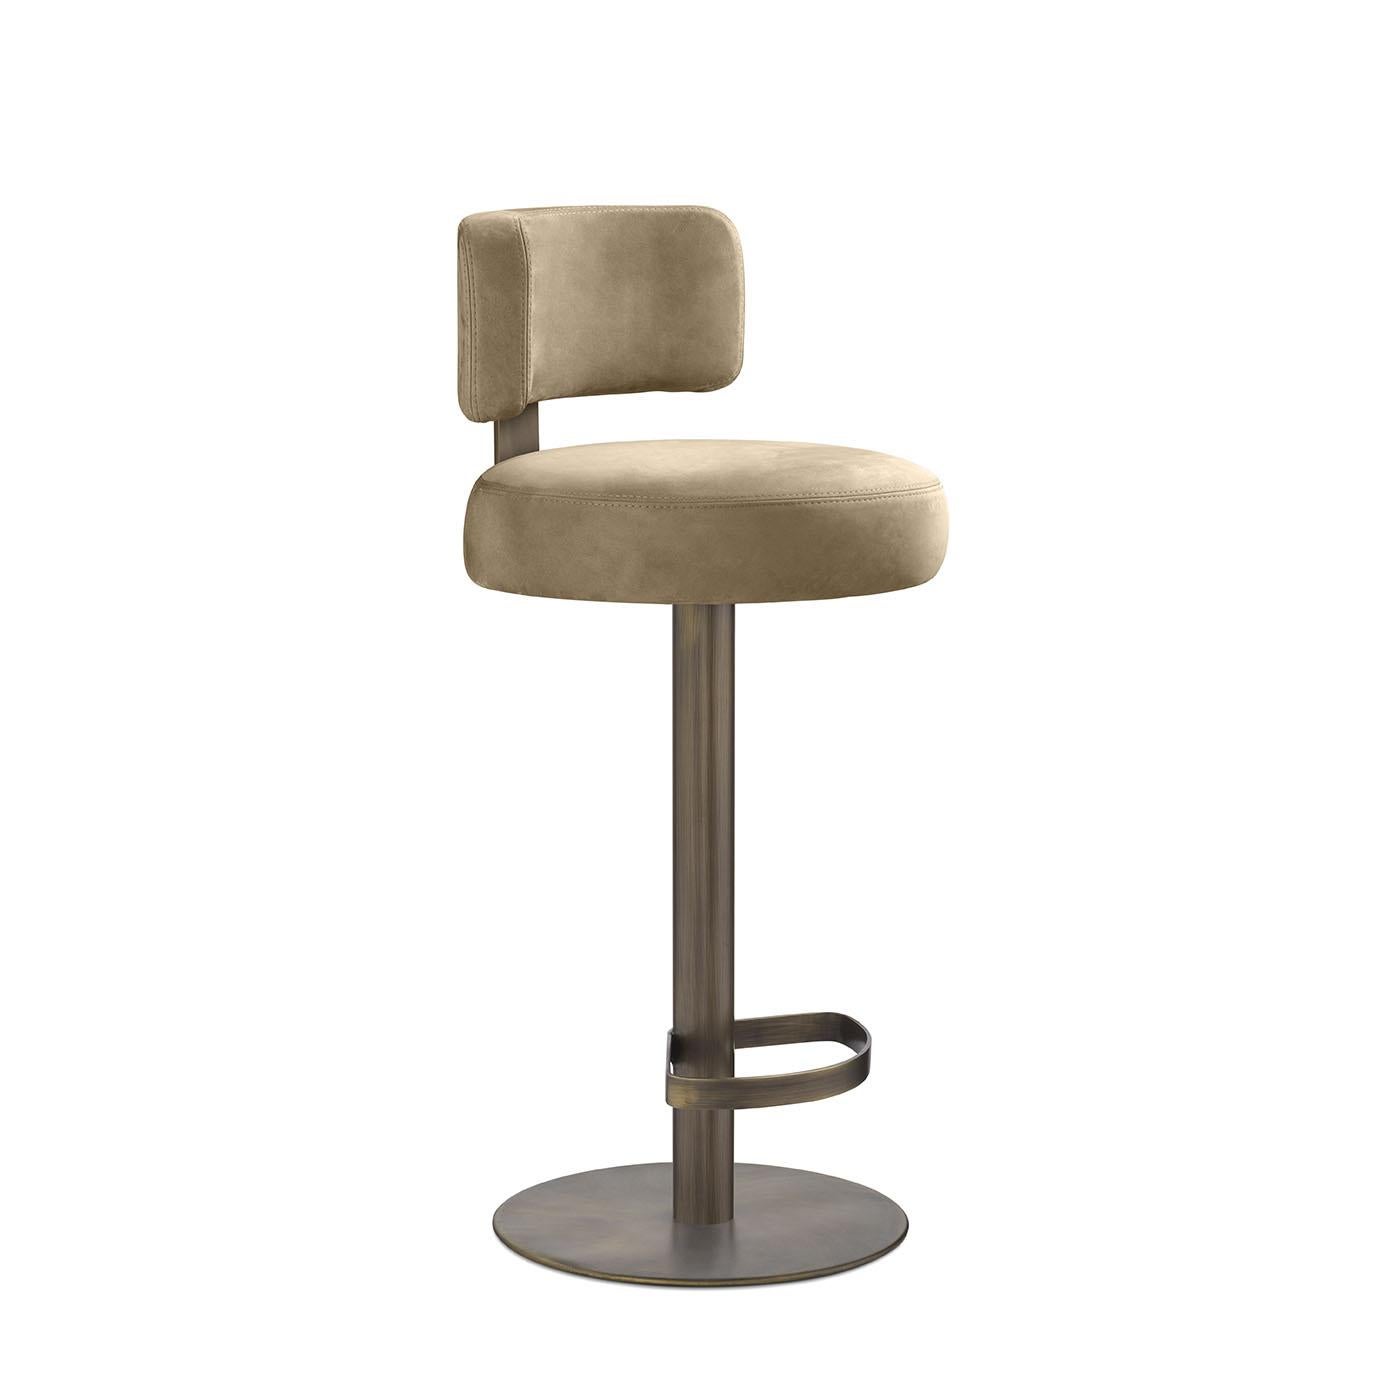 With luxurious details in chromed aluminum and rich fabrics and leather, the design combines classic with contemporary. Metal structure in chromed iron. Seat and backrest in molded polyurethane rubber.